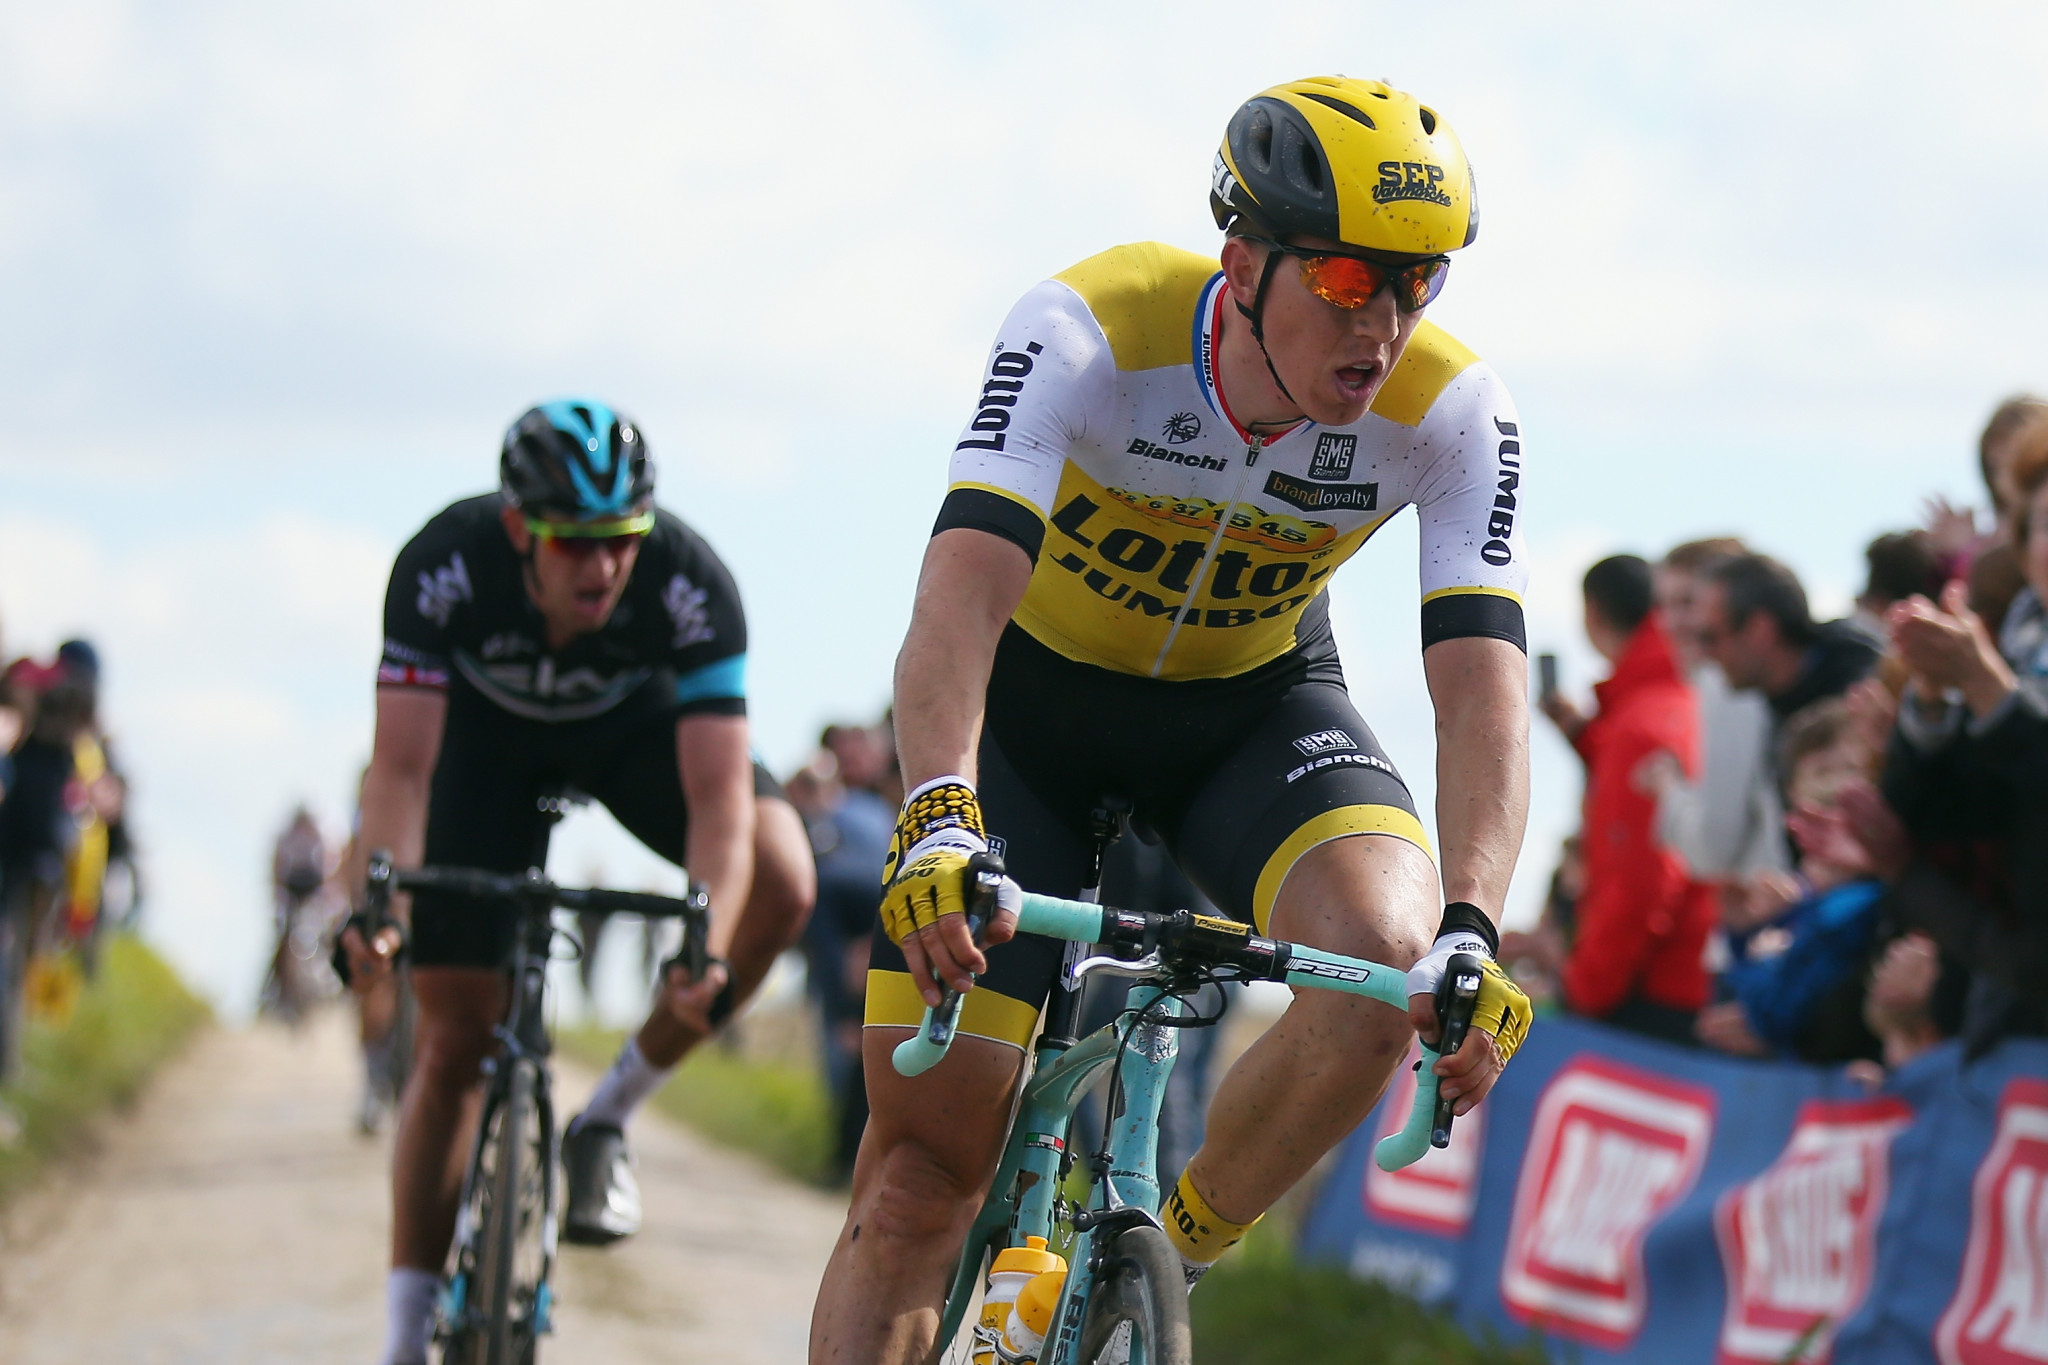 Belgium's Sep Vanmarcke is set to defend his Bretagne Classic Ouest-France title in Plouay tomorrow ©Getty Images